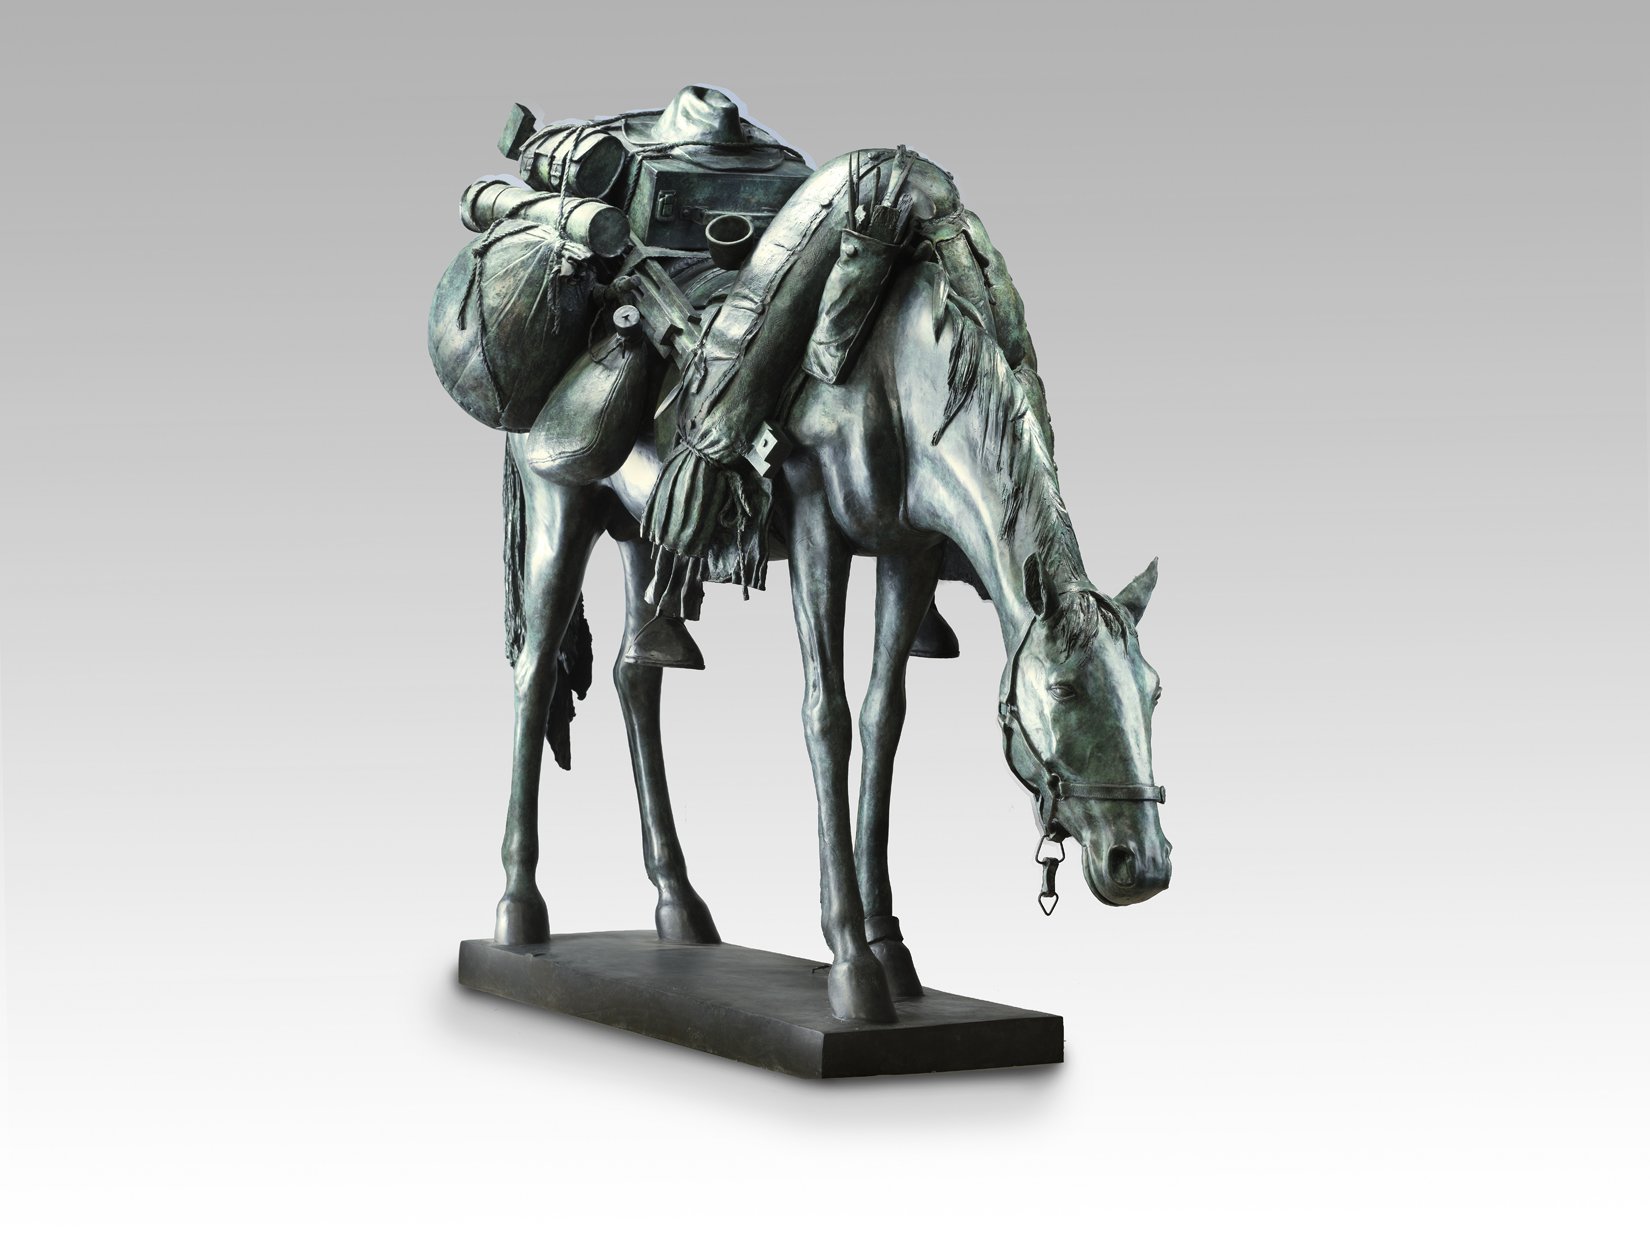 Equine Impedimenta (Tully's baggage) 2019 Bronze Edition of 12, H 121 x W 74 x L 150 cm, base length 100 cm, base width 33cm, weight approx 200 kg 1498.jpg